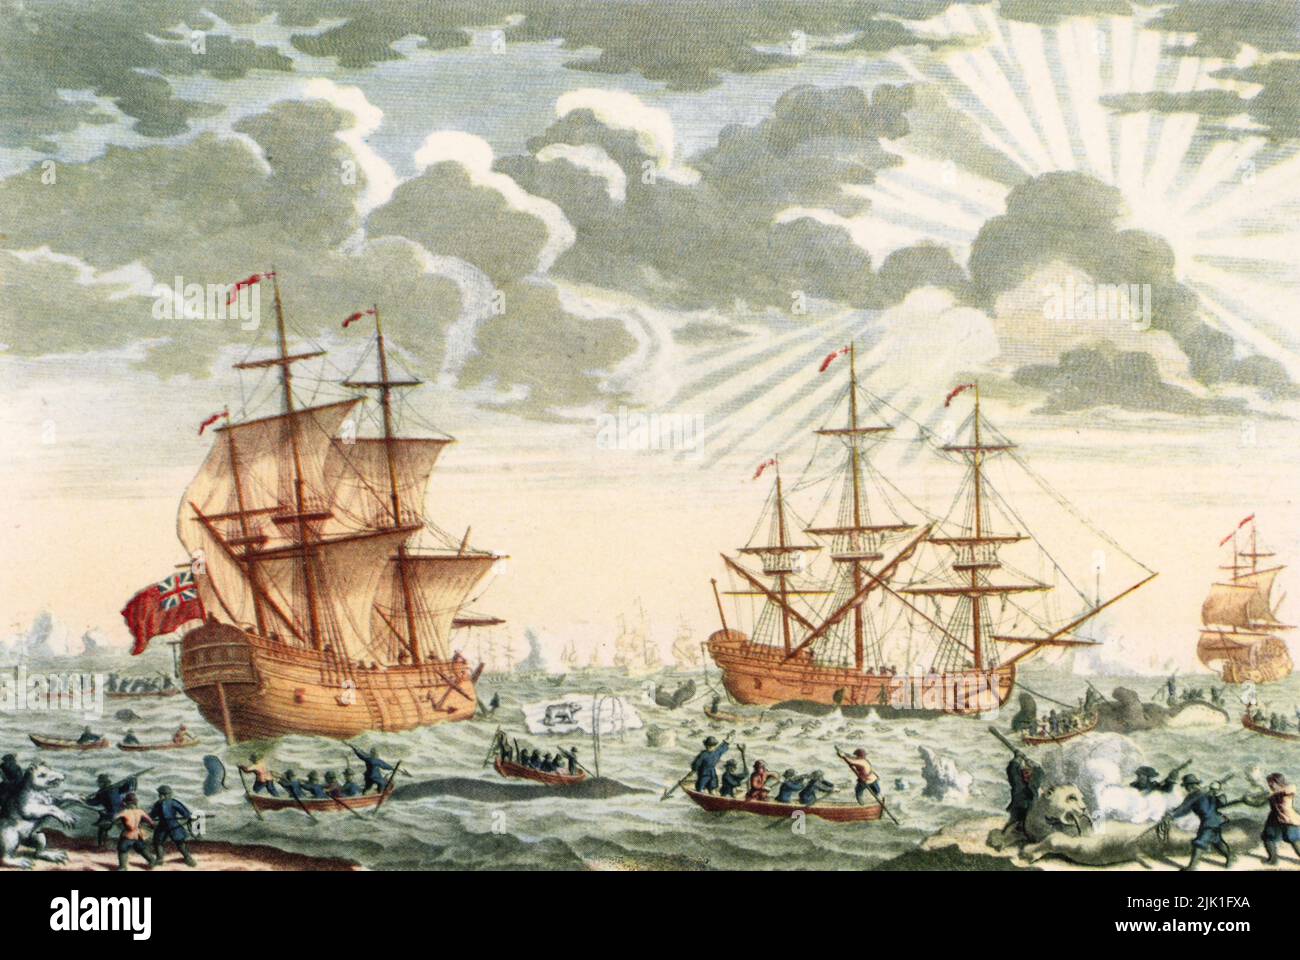 Whale or Greenland Fishery, c1721. By Elisha Kirkall (c1682-1742), after Thomas Baston fl(1699-1730). Typically considered as the first stand-alone British whaling print, the imagery is drawn from earlier Dutch examples. The print shows an Arctic scene, in which whalers are in action. A polar bear and walrus can be seen being killed in the foreground. Stock Photo